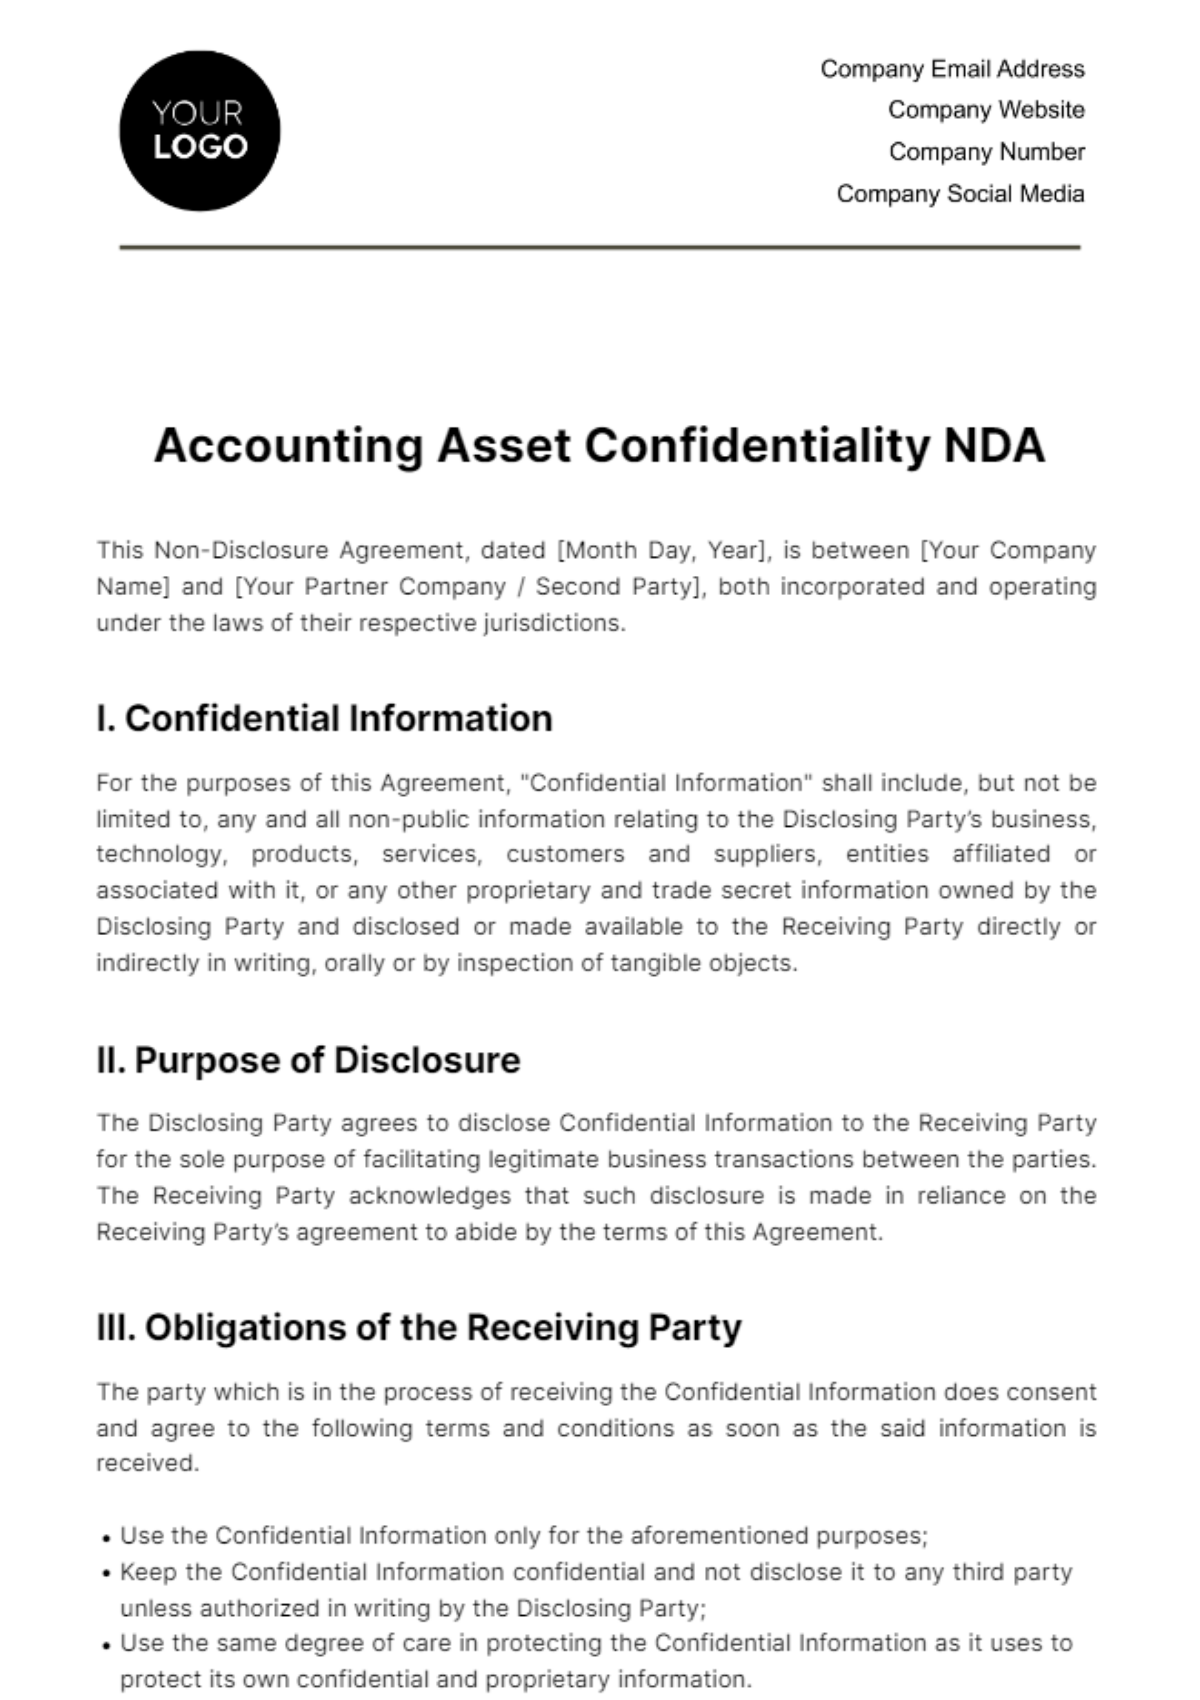 Accounting Asset Confidentiality NDA Template